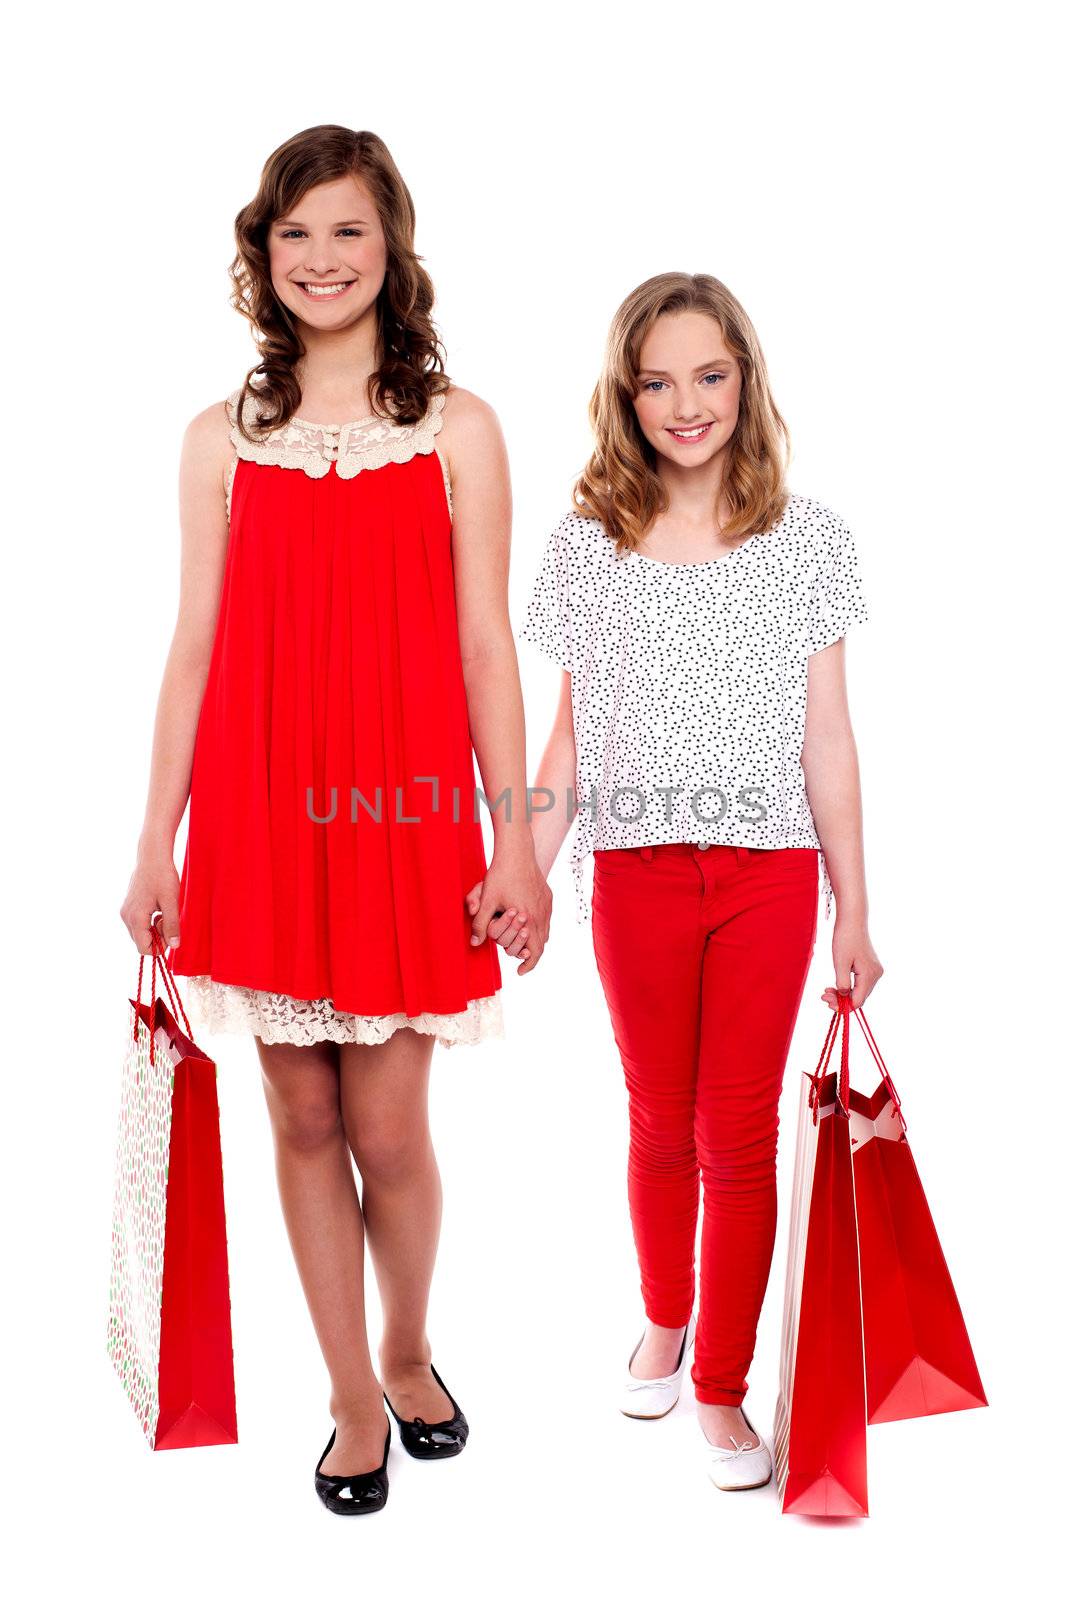 Glamorous girls walking after purchases against white background